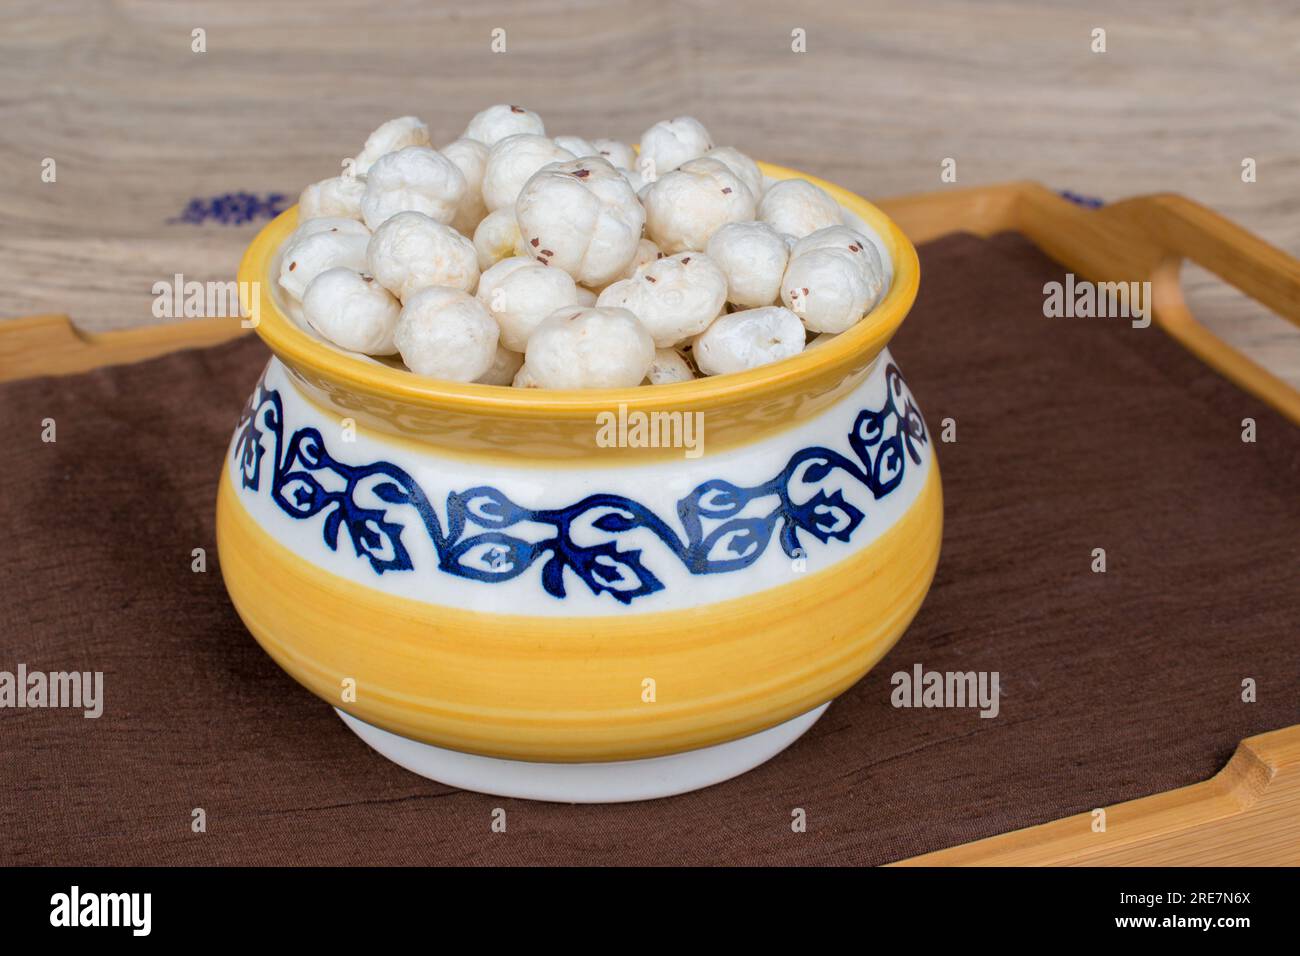 Makhana or foxnut in beautiful yellow and blue pot on a wooden tray. selective focus on subject Stock Photo